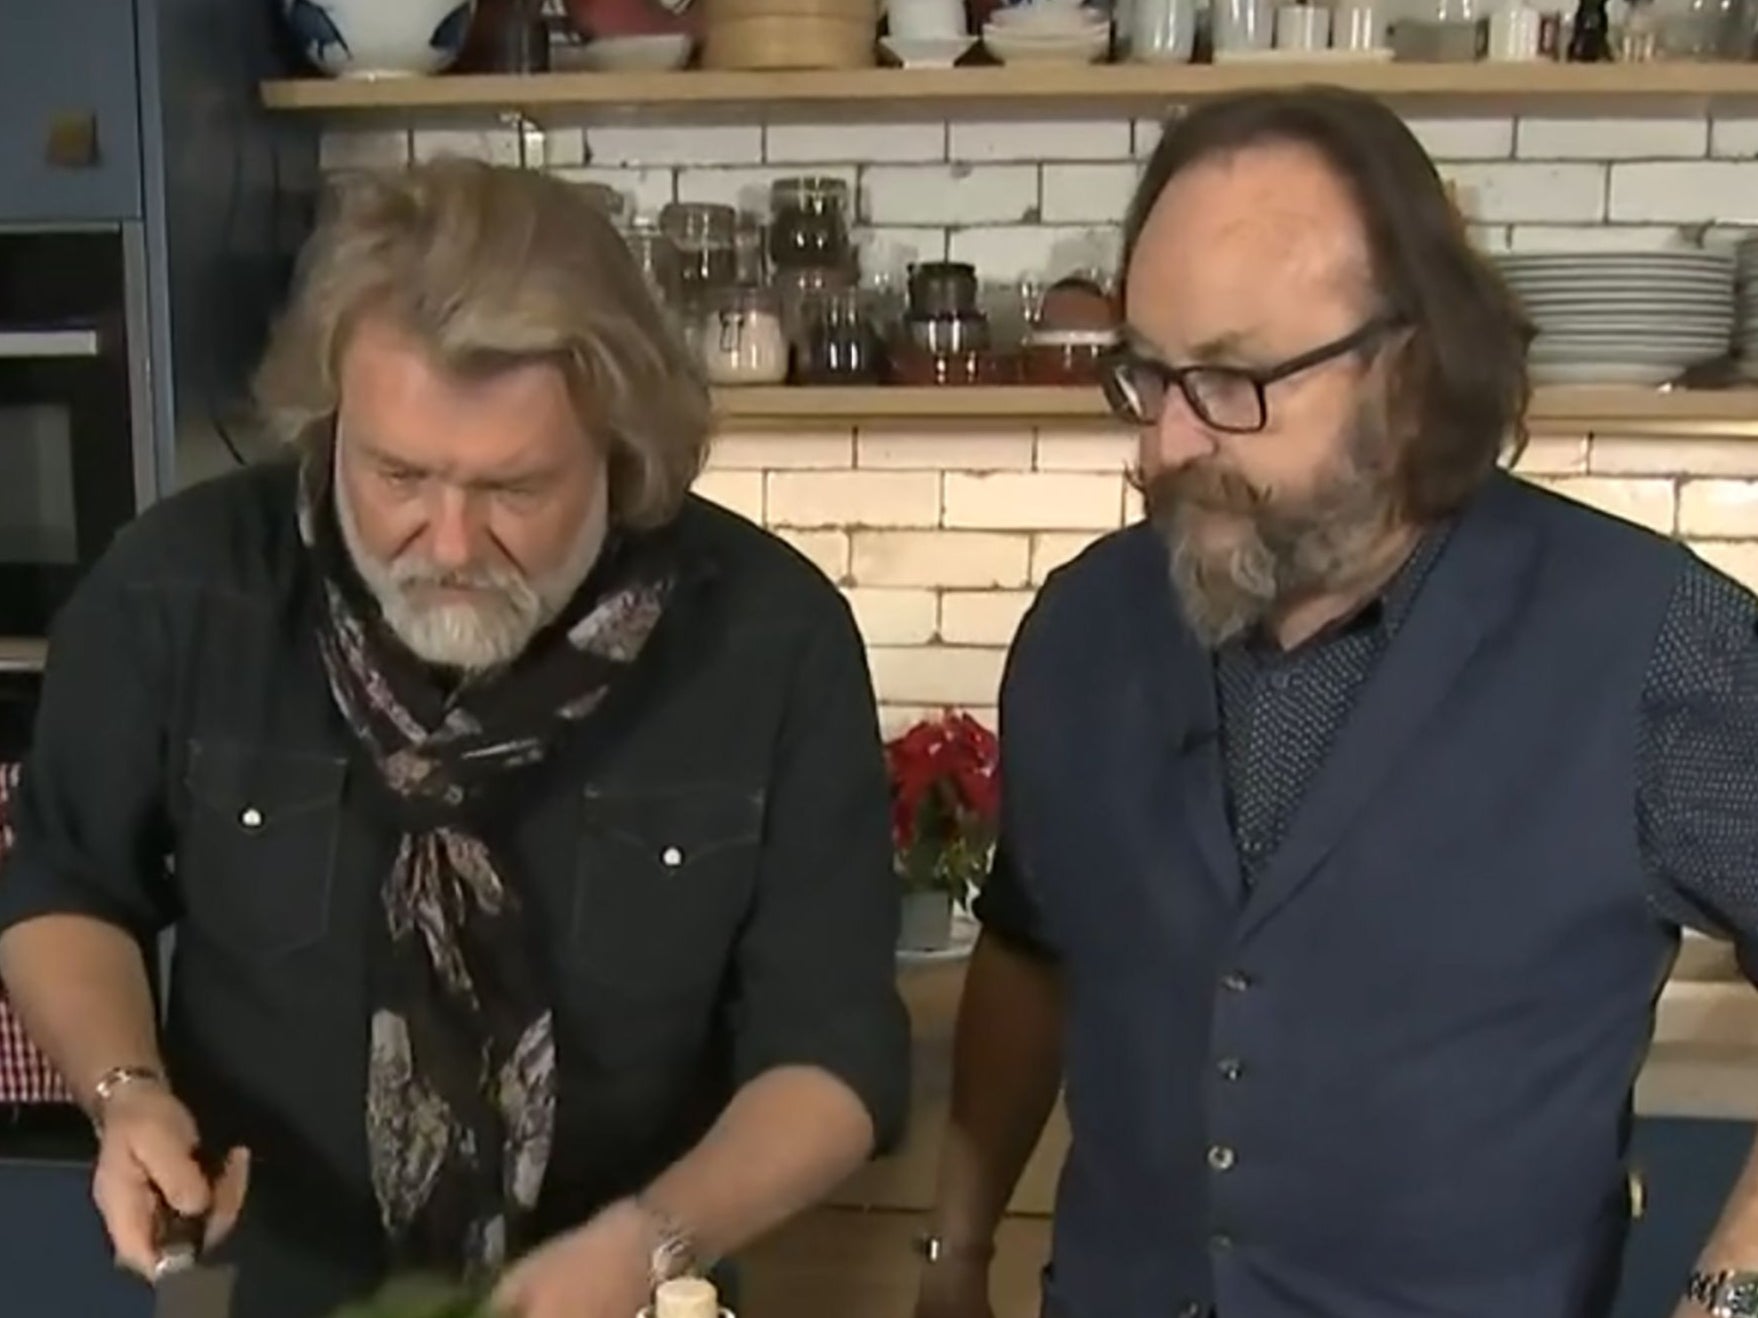 Si King and Dace Myers – also known as the Hairy Bikers – on ‘This Morning’ in 2020